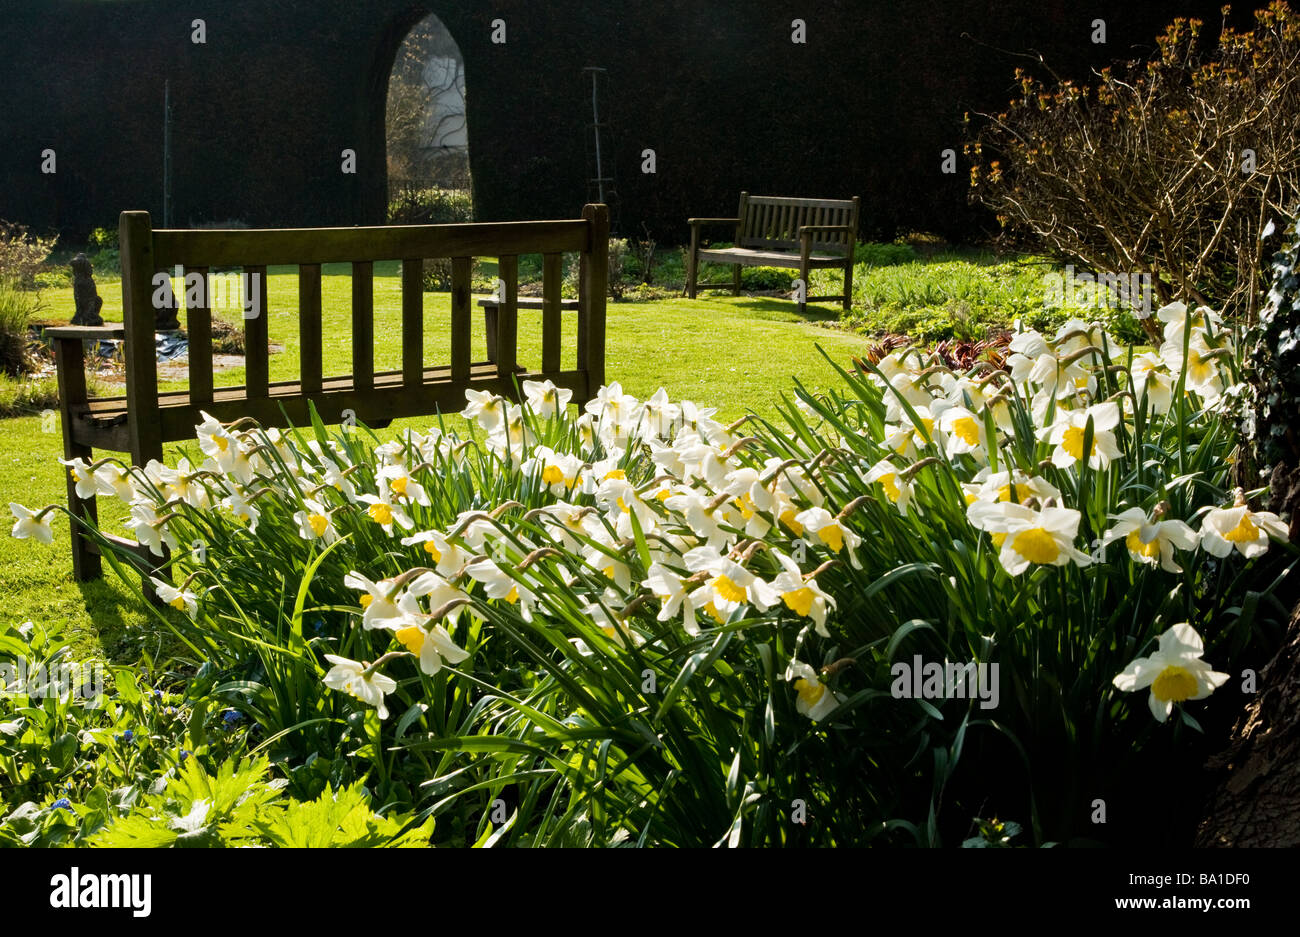 clump of daffodils backlit in the herbaceous garden at stourton